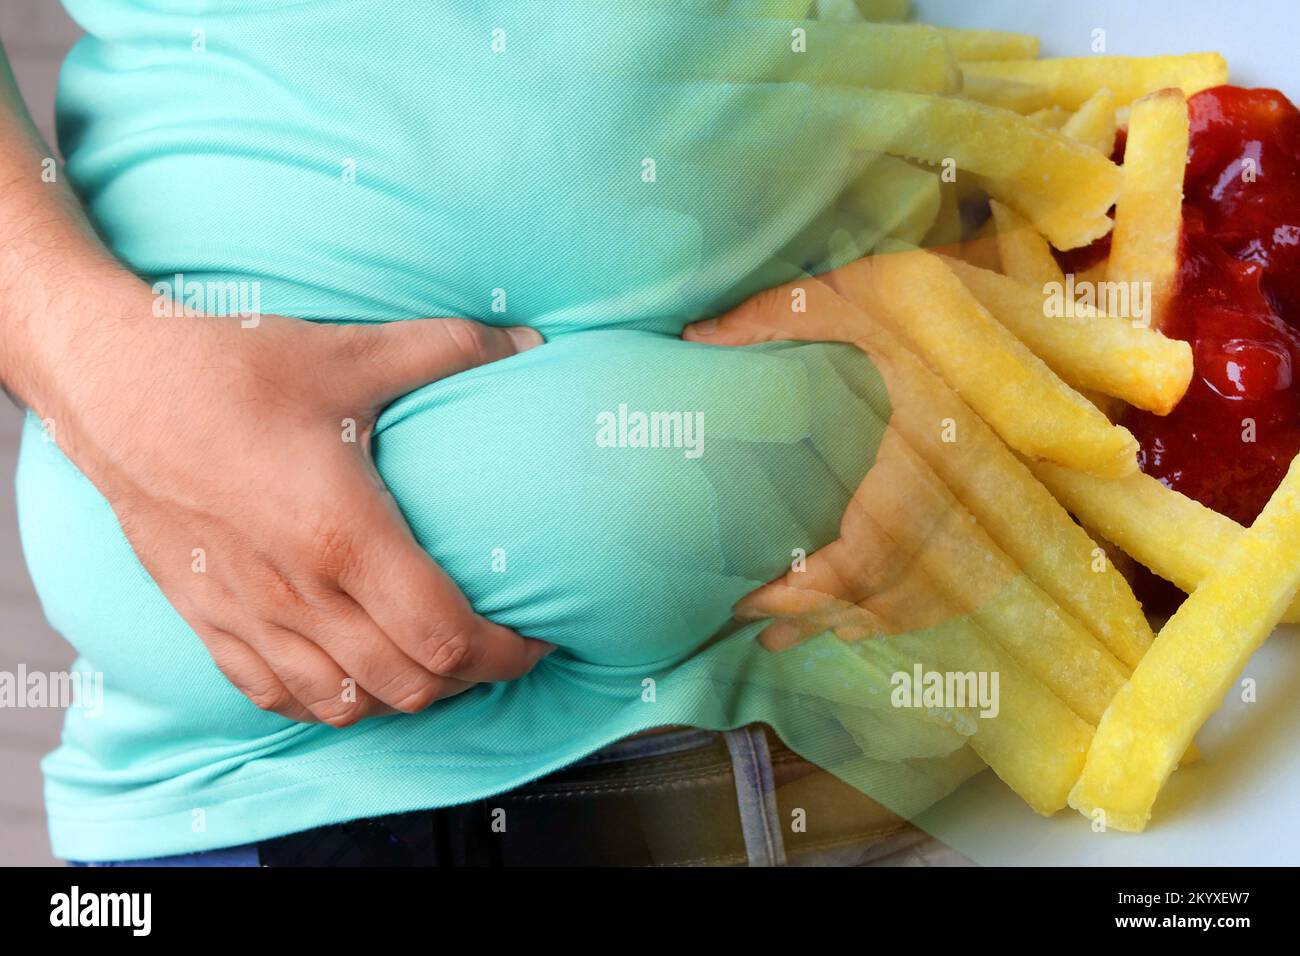 Obesity and junk food. Man clutching his belly fat and French fries with ketchup. Stock Photo